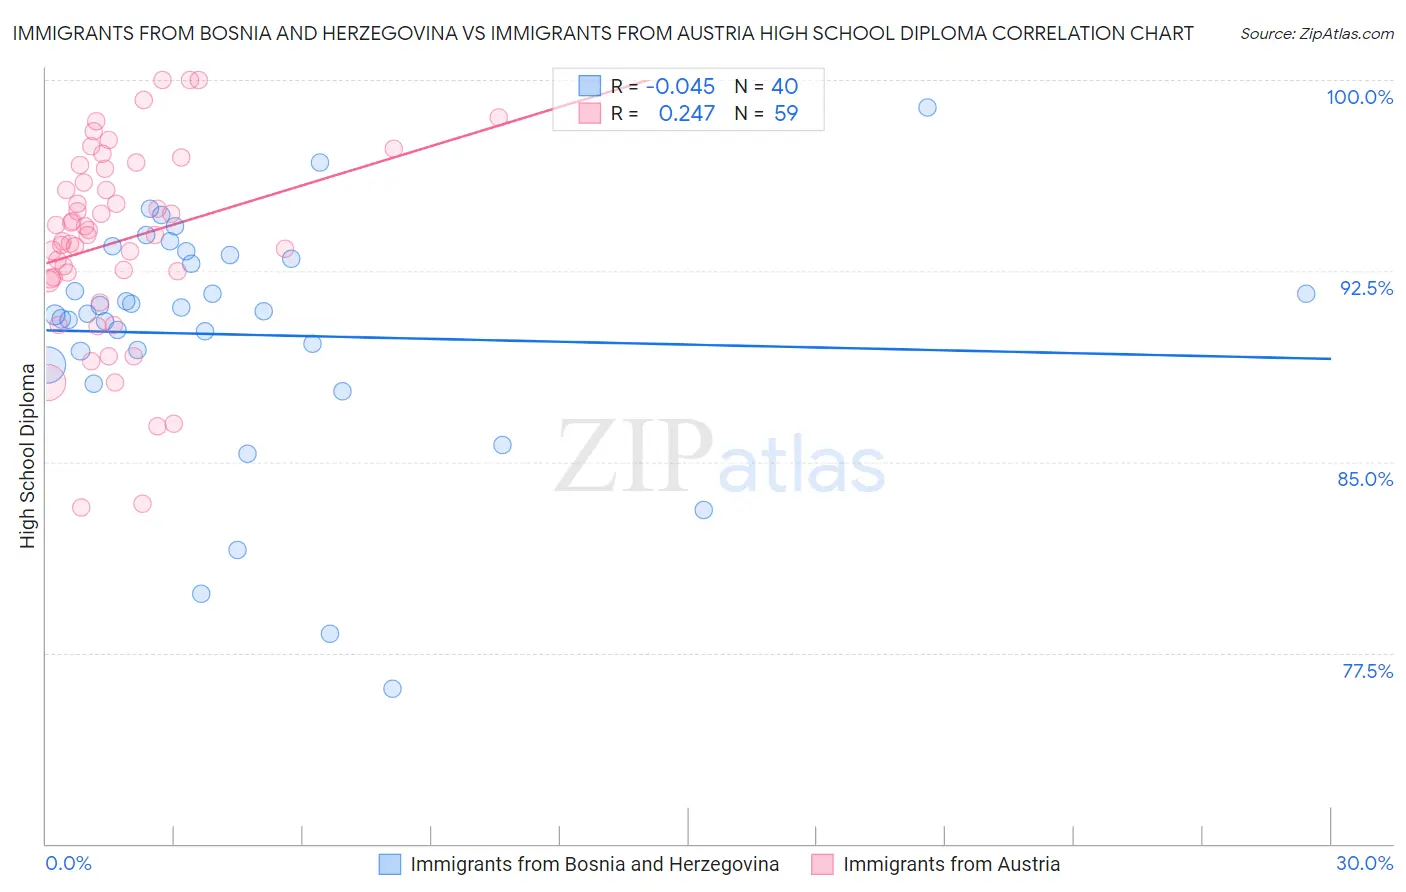 Immigrants from Bosnia and Herzegovina vs Immigrants from Austria High School Diploma